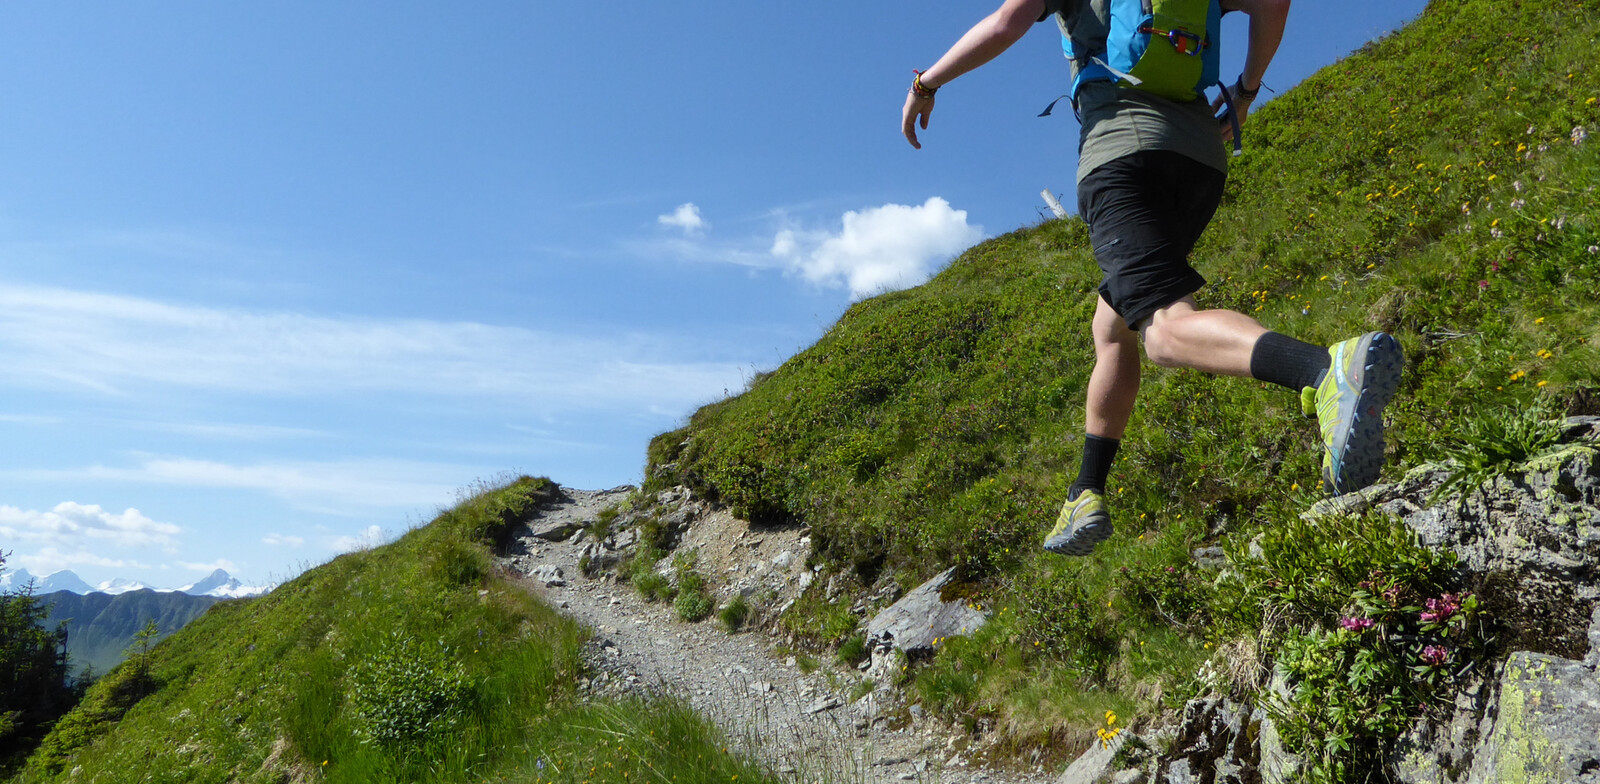 Jumping into the trail to Stemmerkogel | © Martin Moser - gehlebt.at